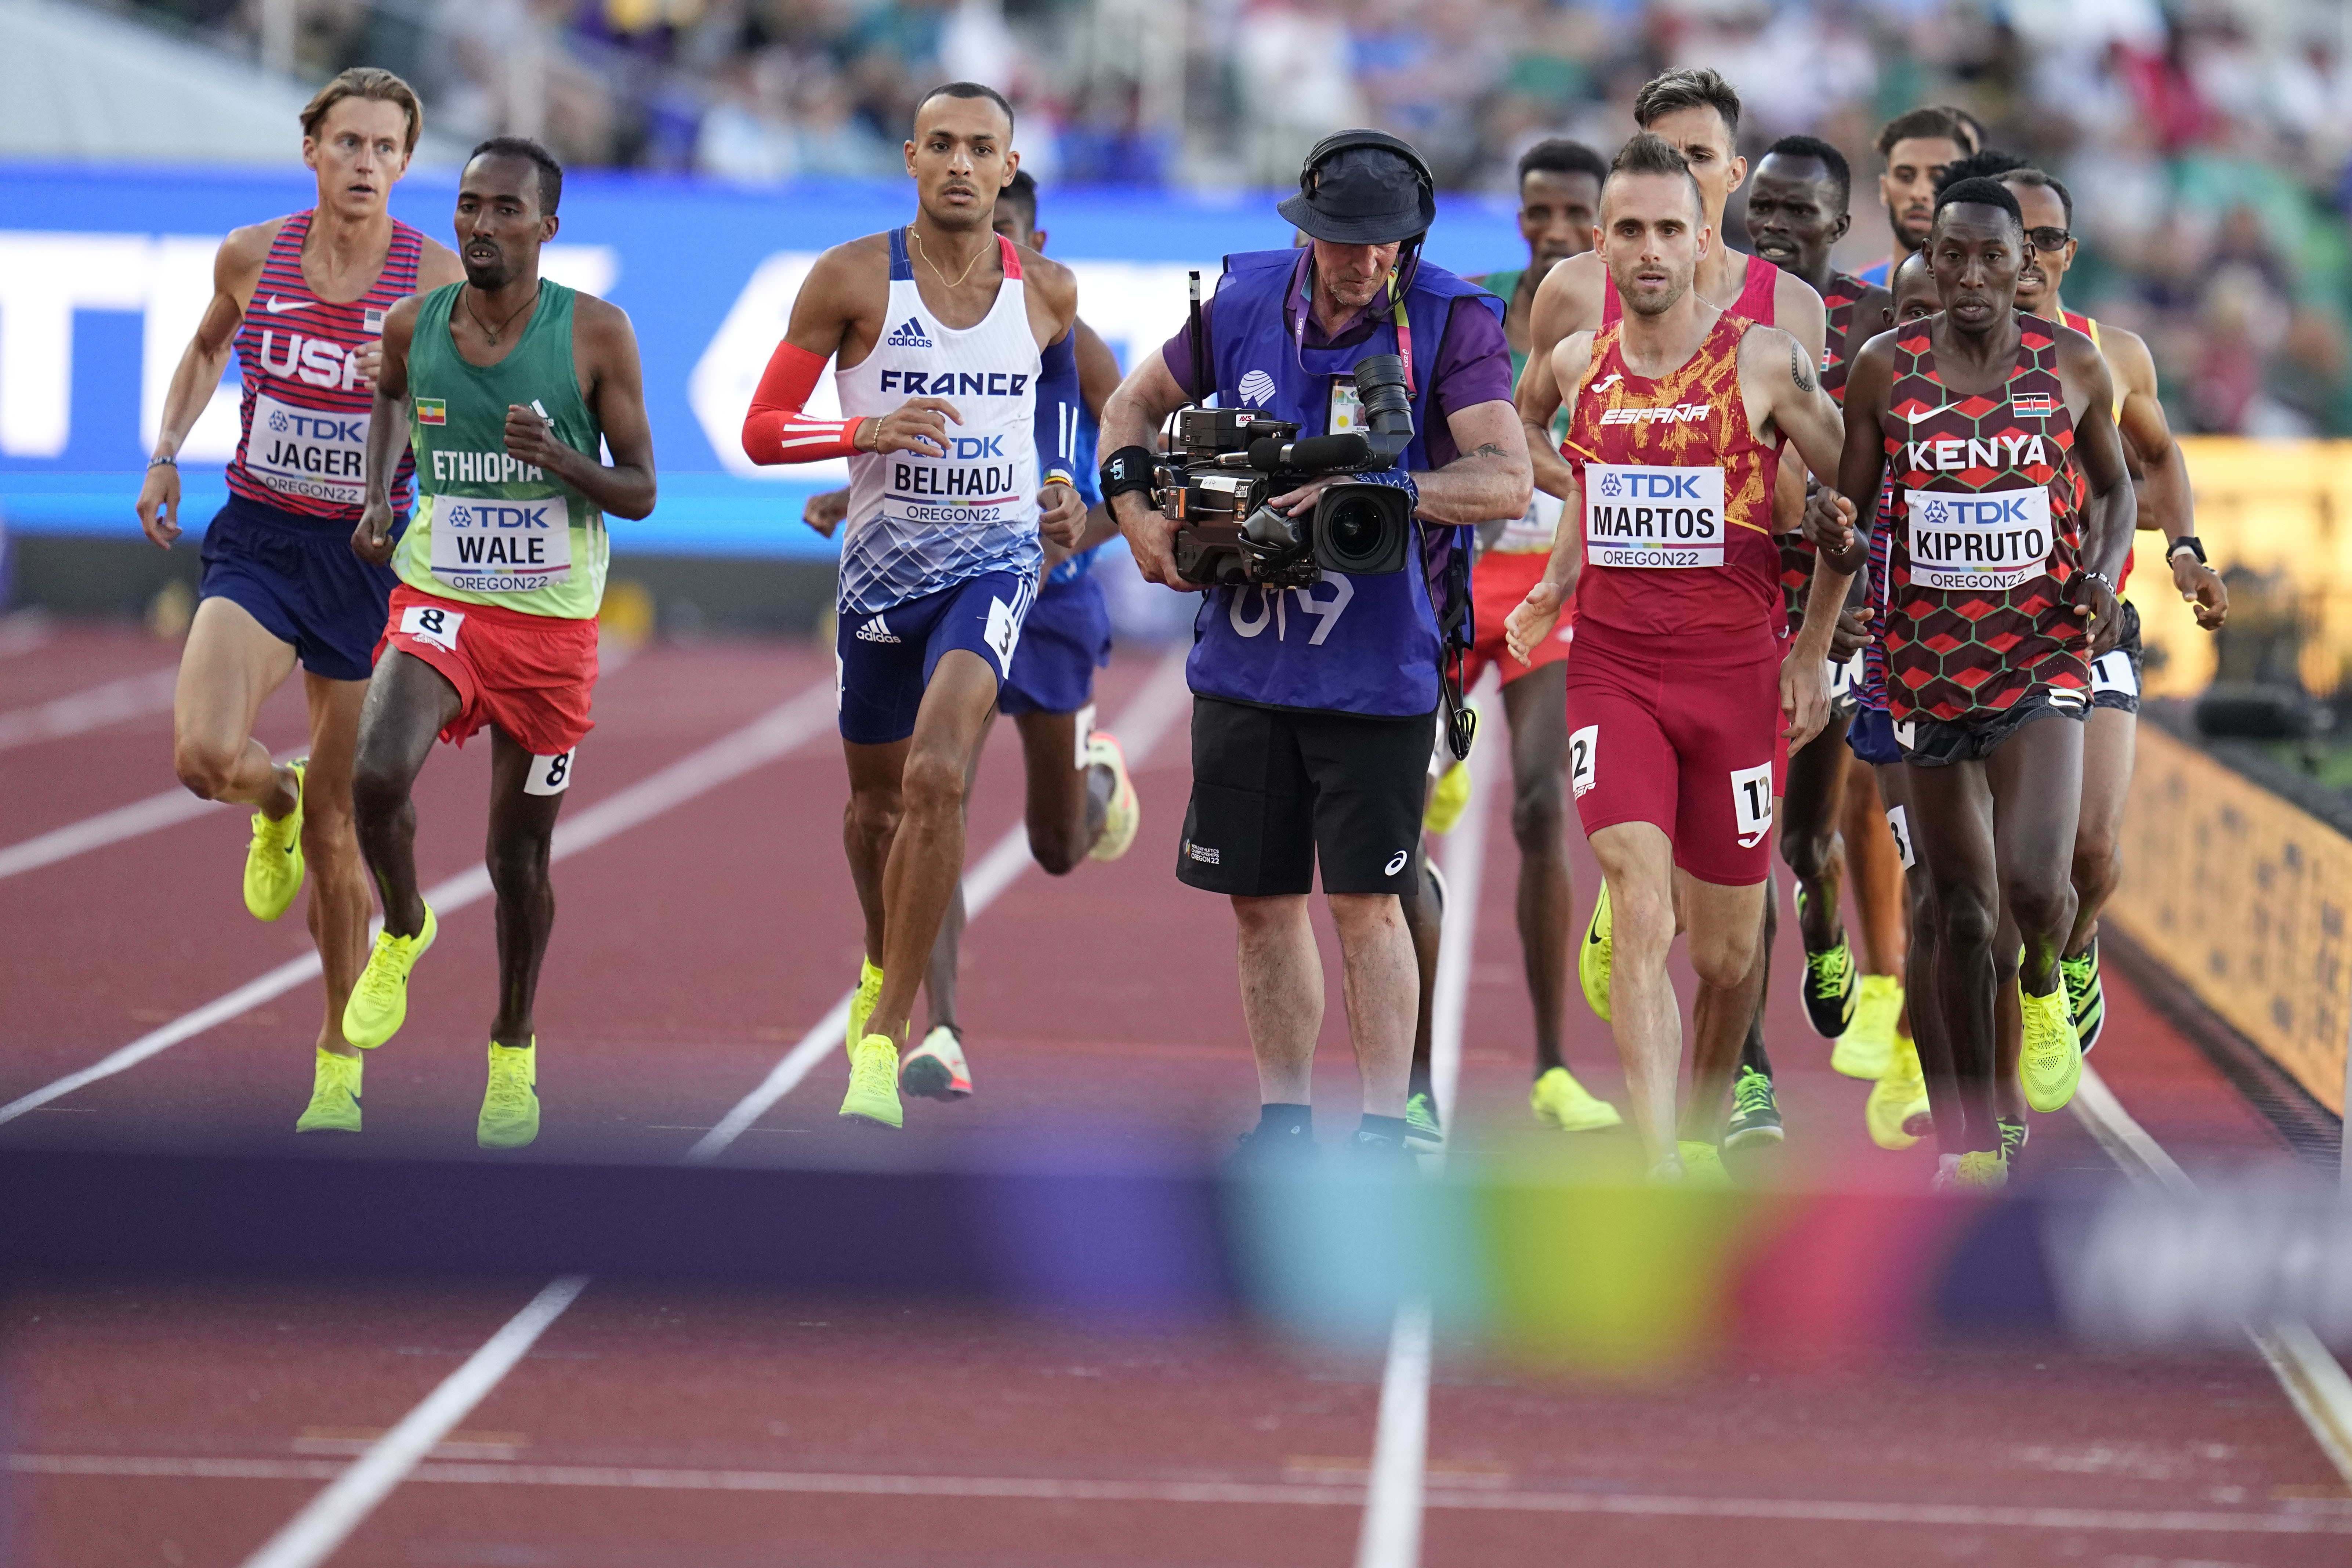 At World Athletics Championships, a new obstacle in the steeplechase a cameraman